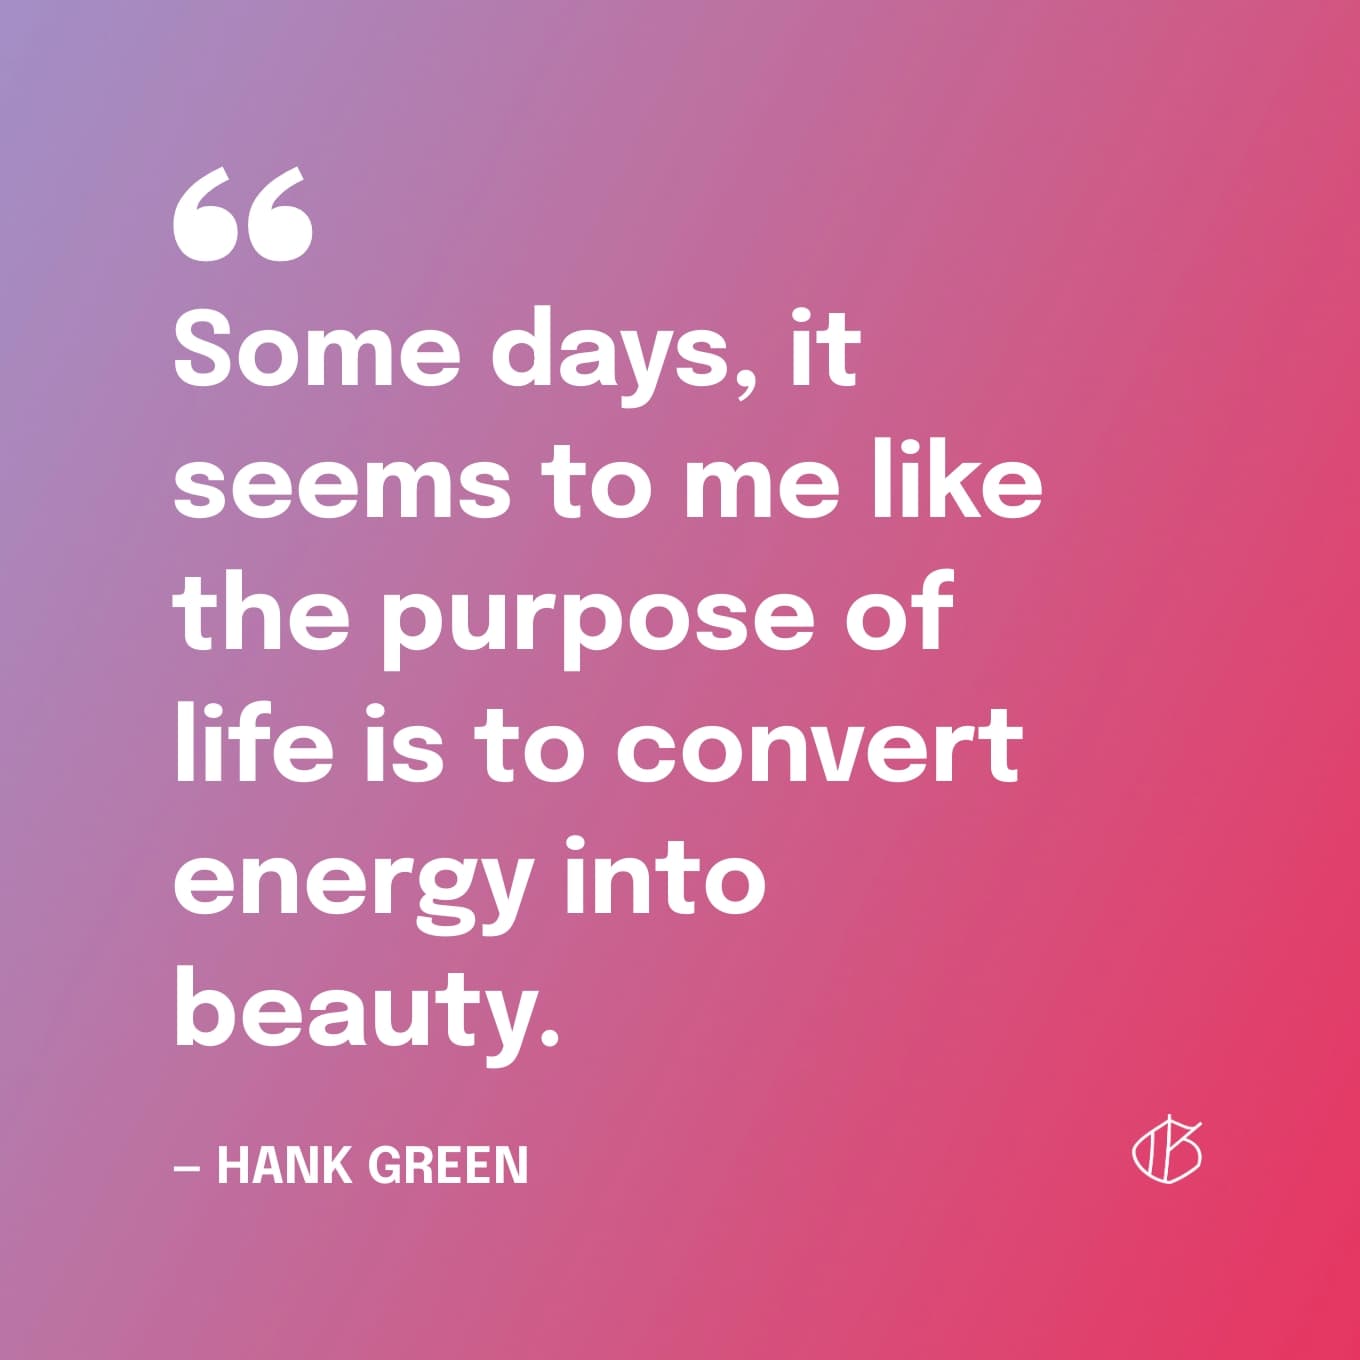 Quote graphic: “Some days, it seems to me like the purpose of life is to convert energy into beauty.” — Hank Green